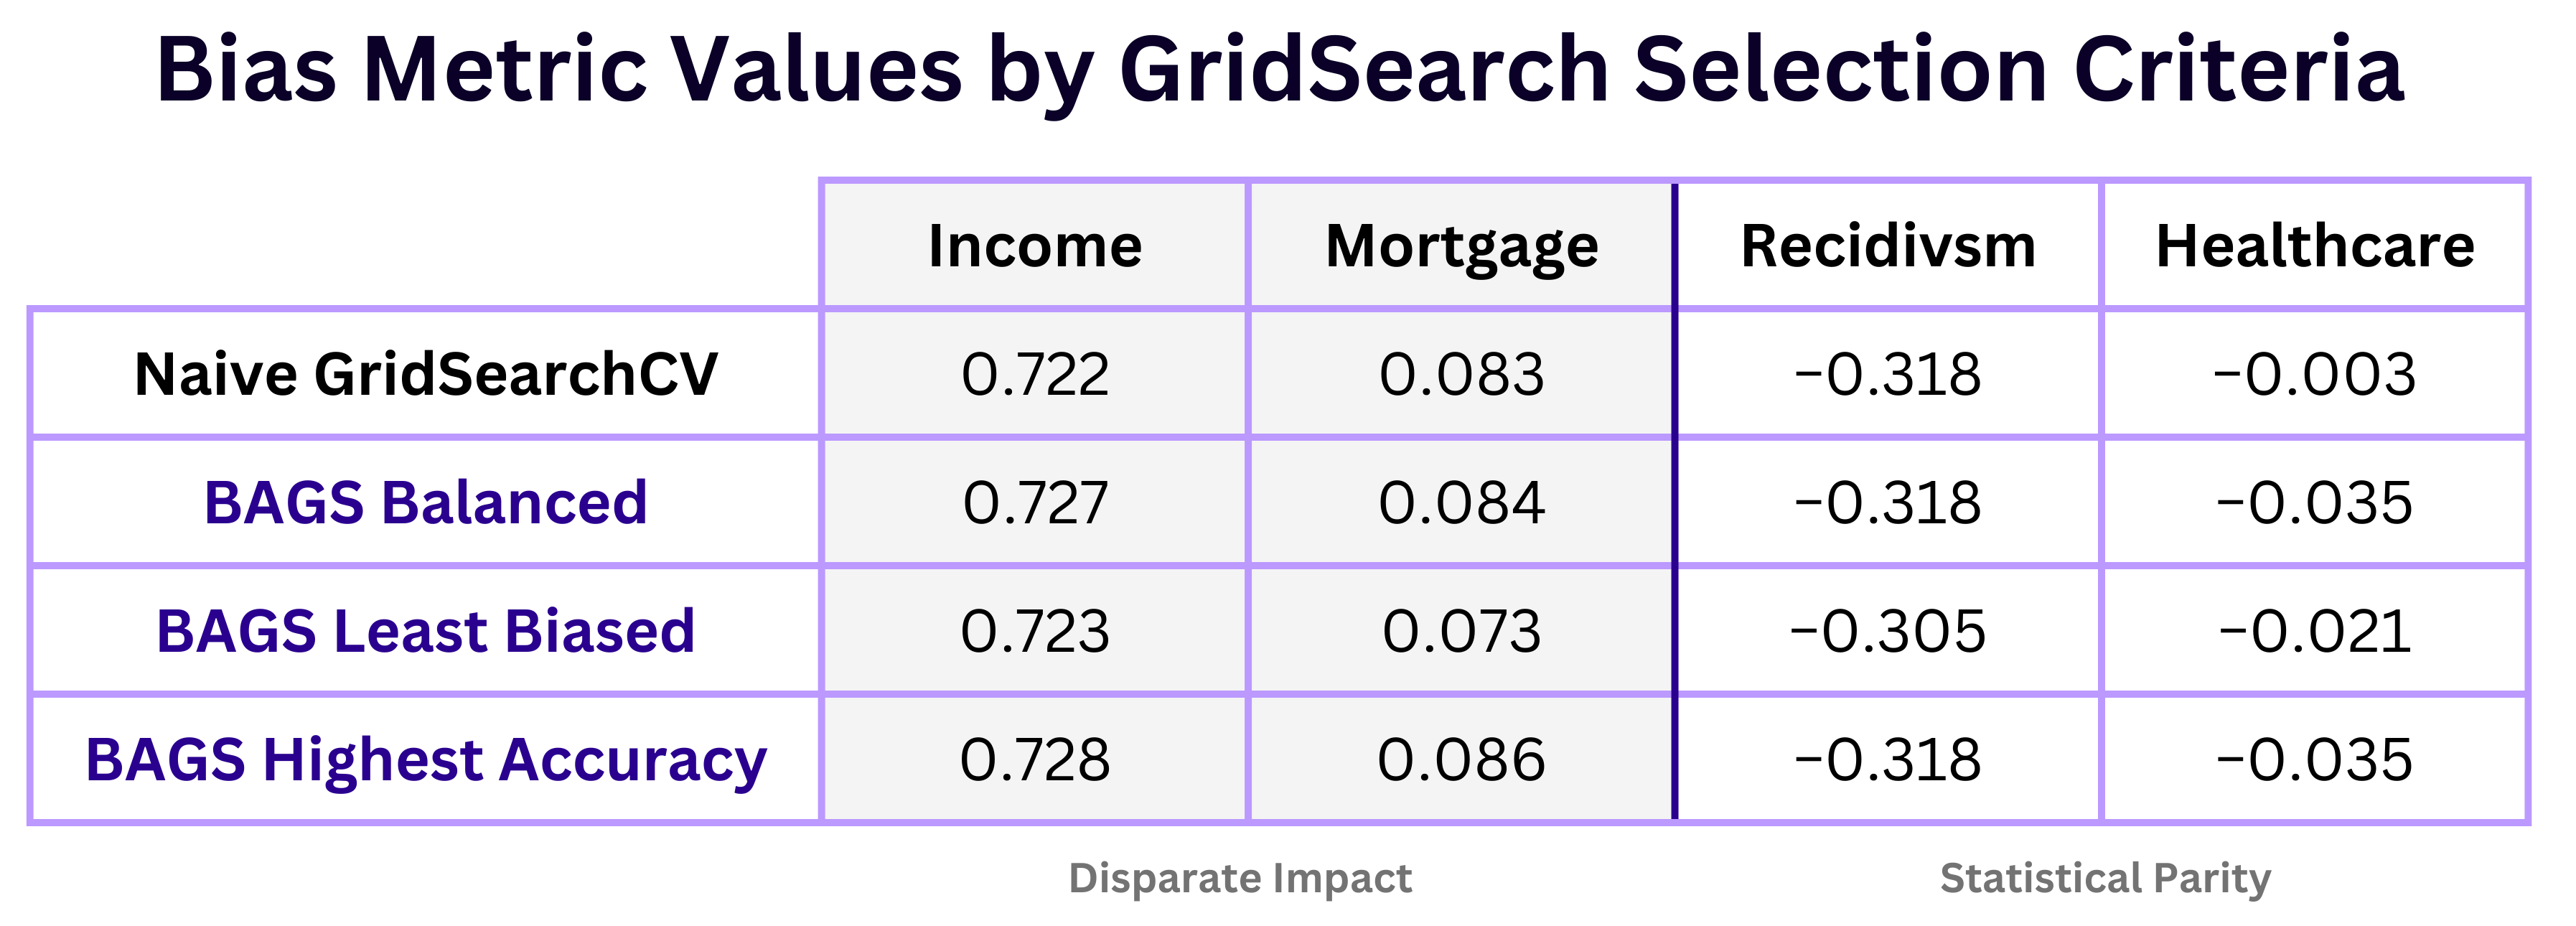 A table depicting the test set bias metrics by gridsearch result